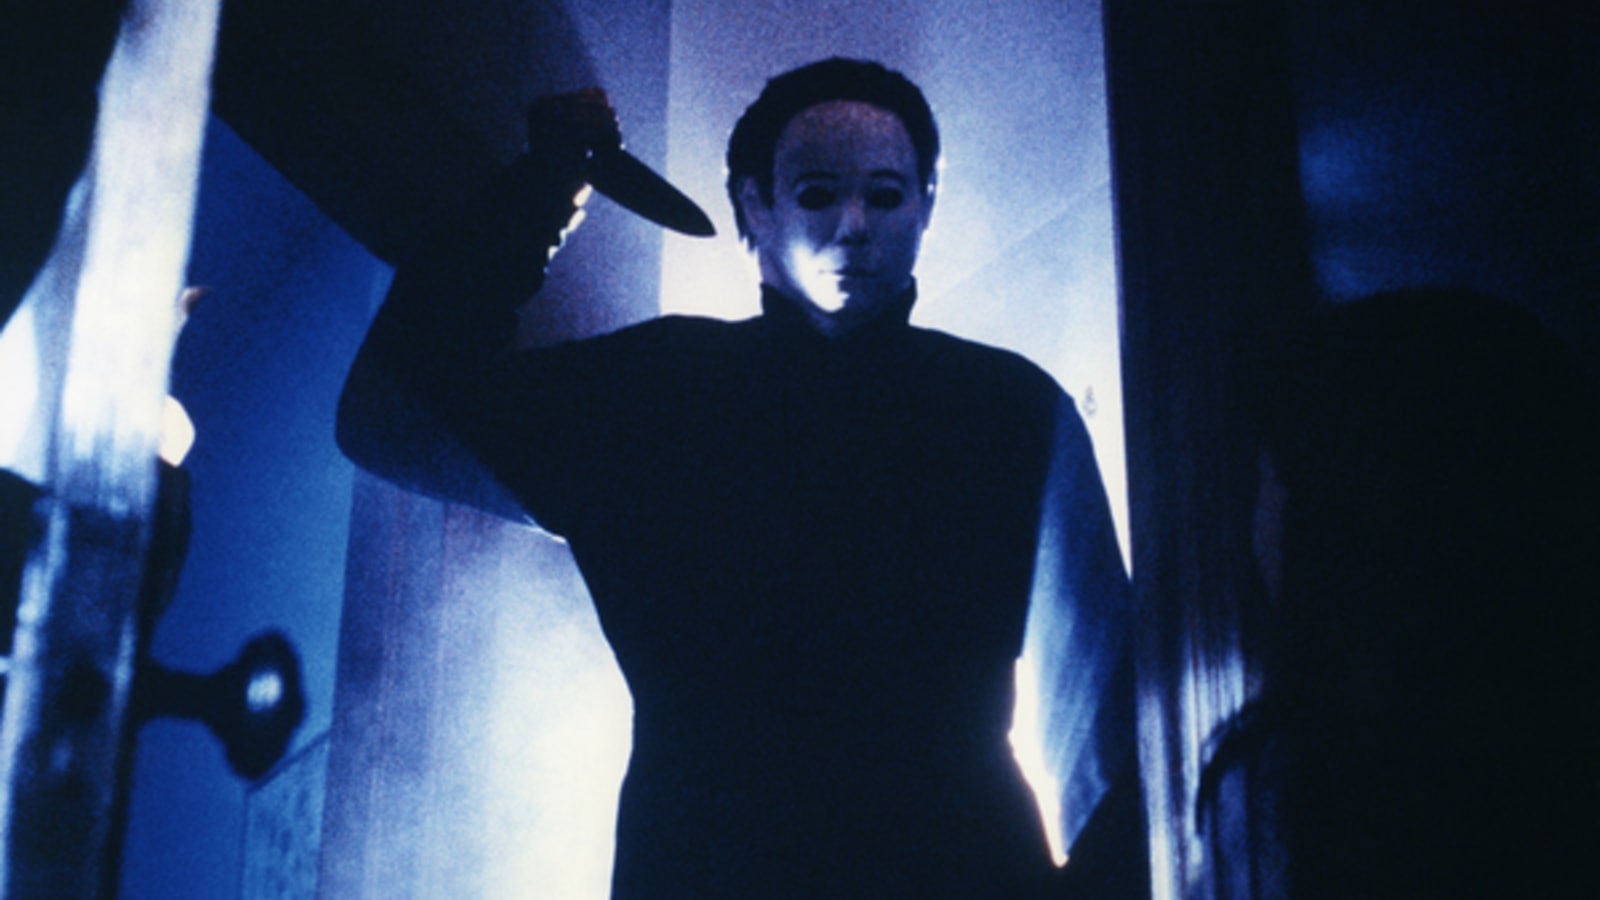 The 25 best Halloween films of all time